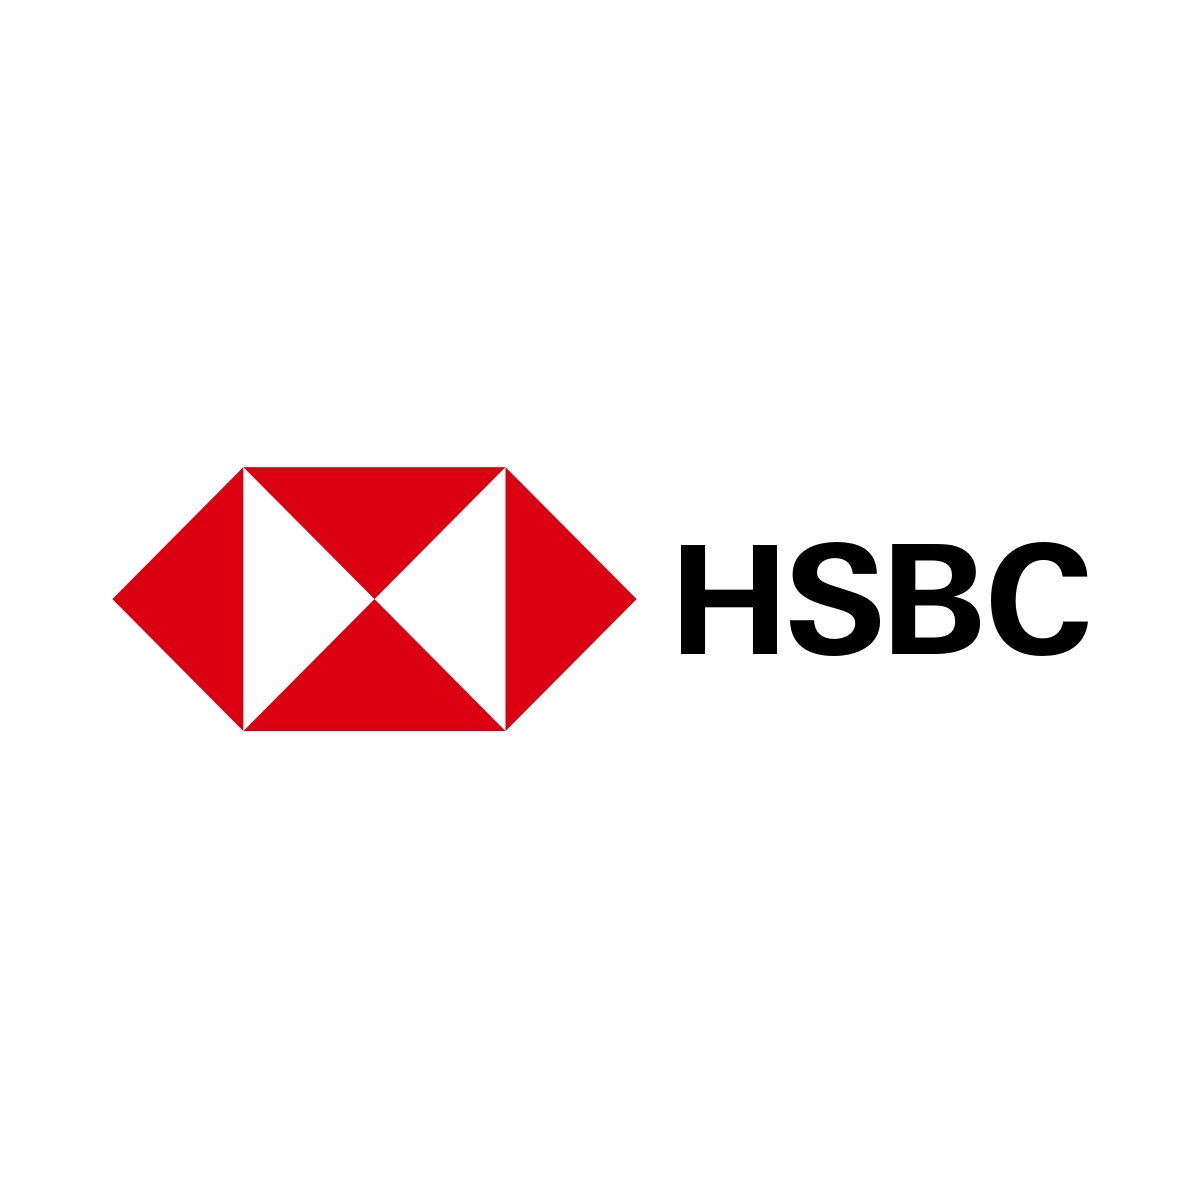 Personal And Online Banking - HSBC Qatar